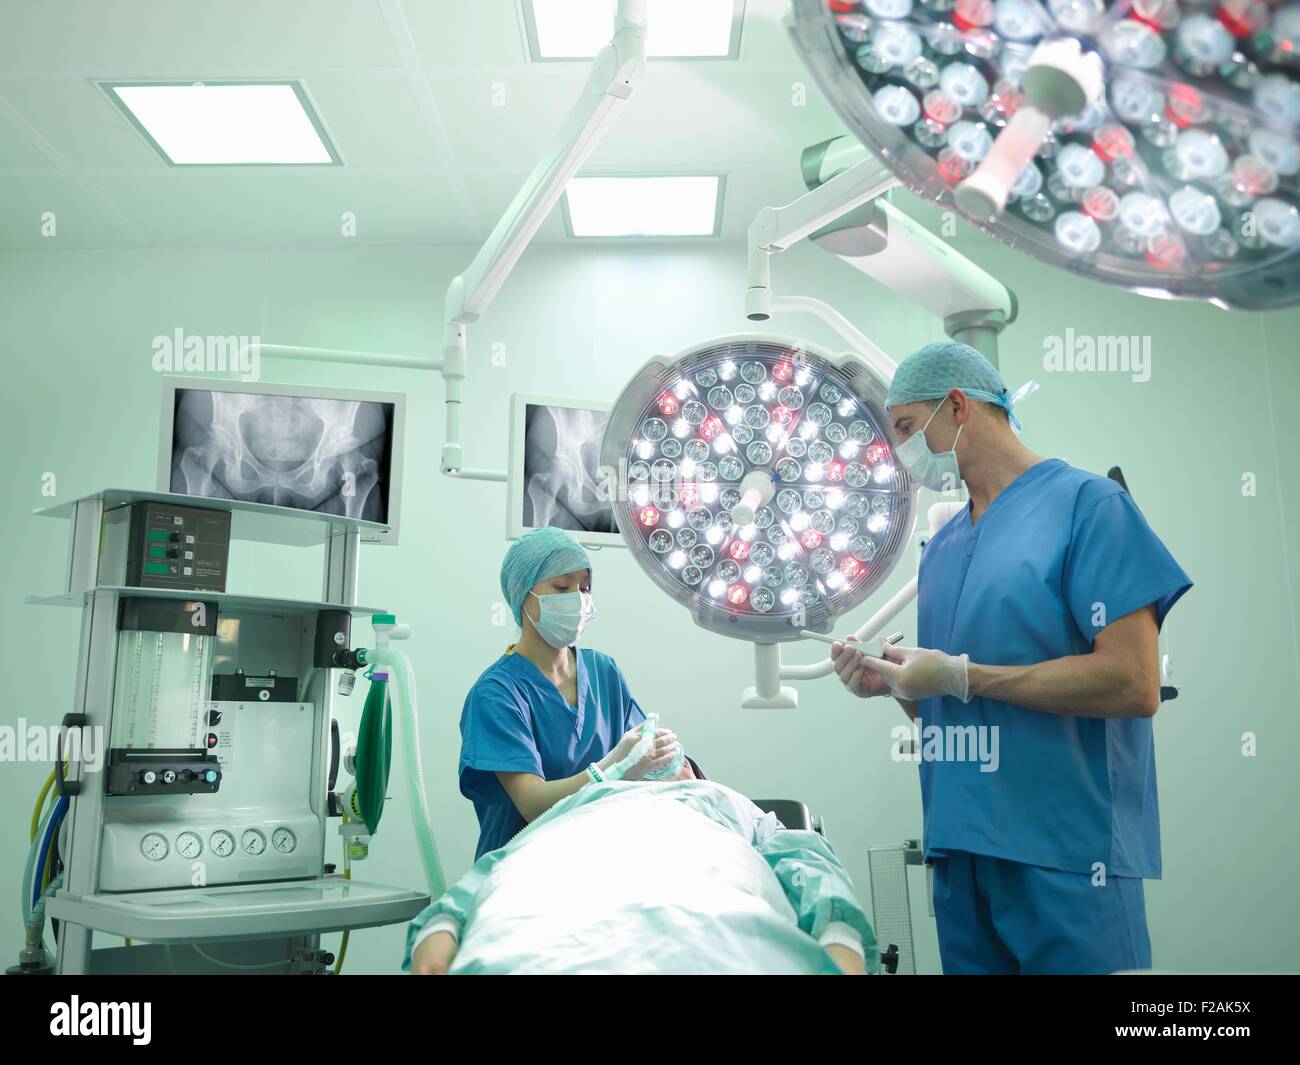 Orthopaedic surgeon and nurse preparing patient for hip surgery in operating theatre Stock Photo